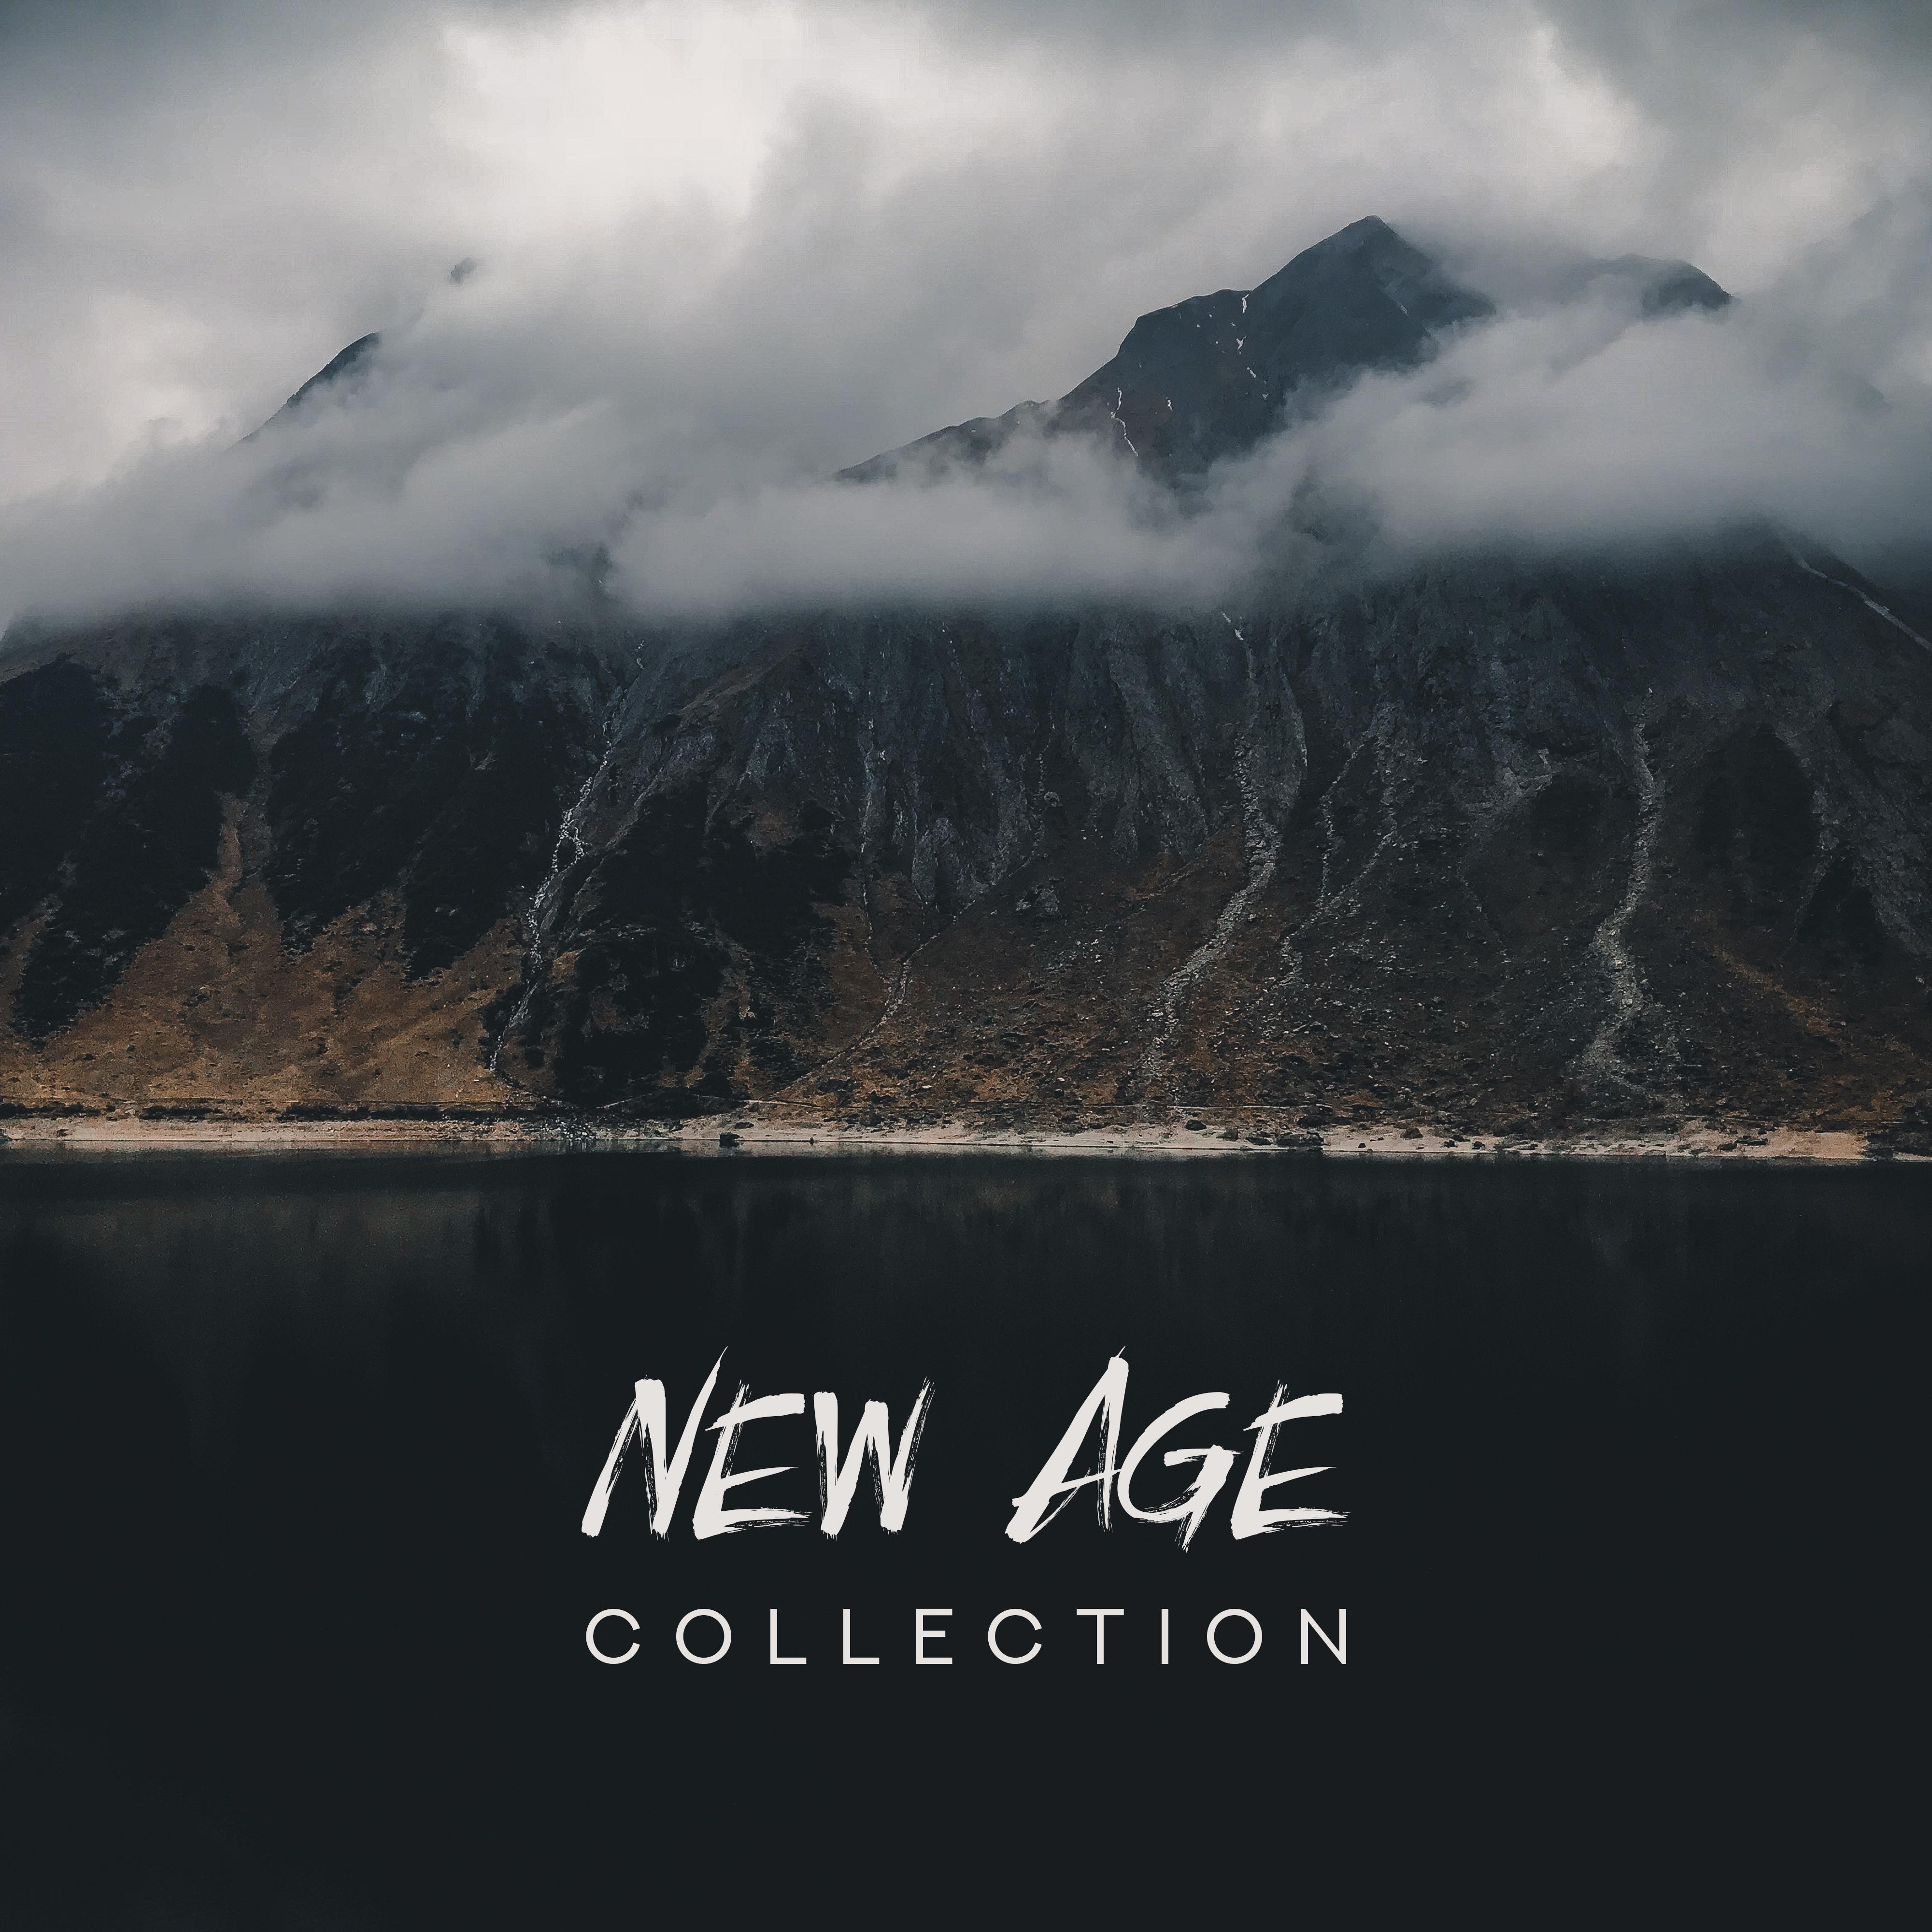 New Age Collection: Music for Learning, Reading, Relaxation, De-stressing, Sleep, Meditation, Therapy and Yoga